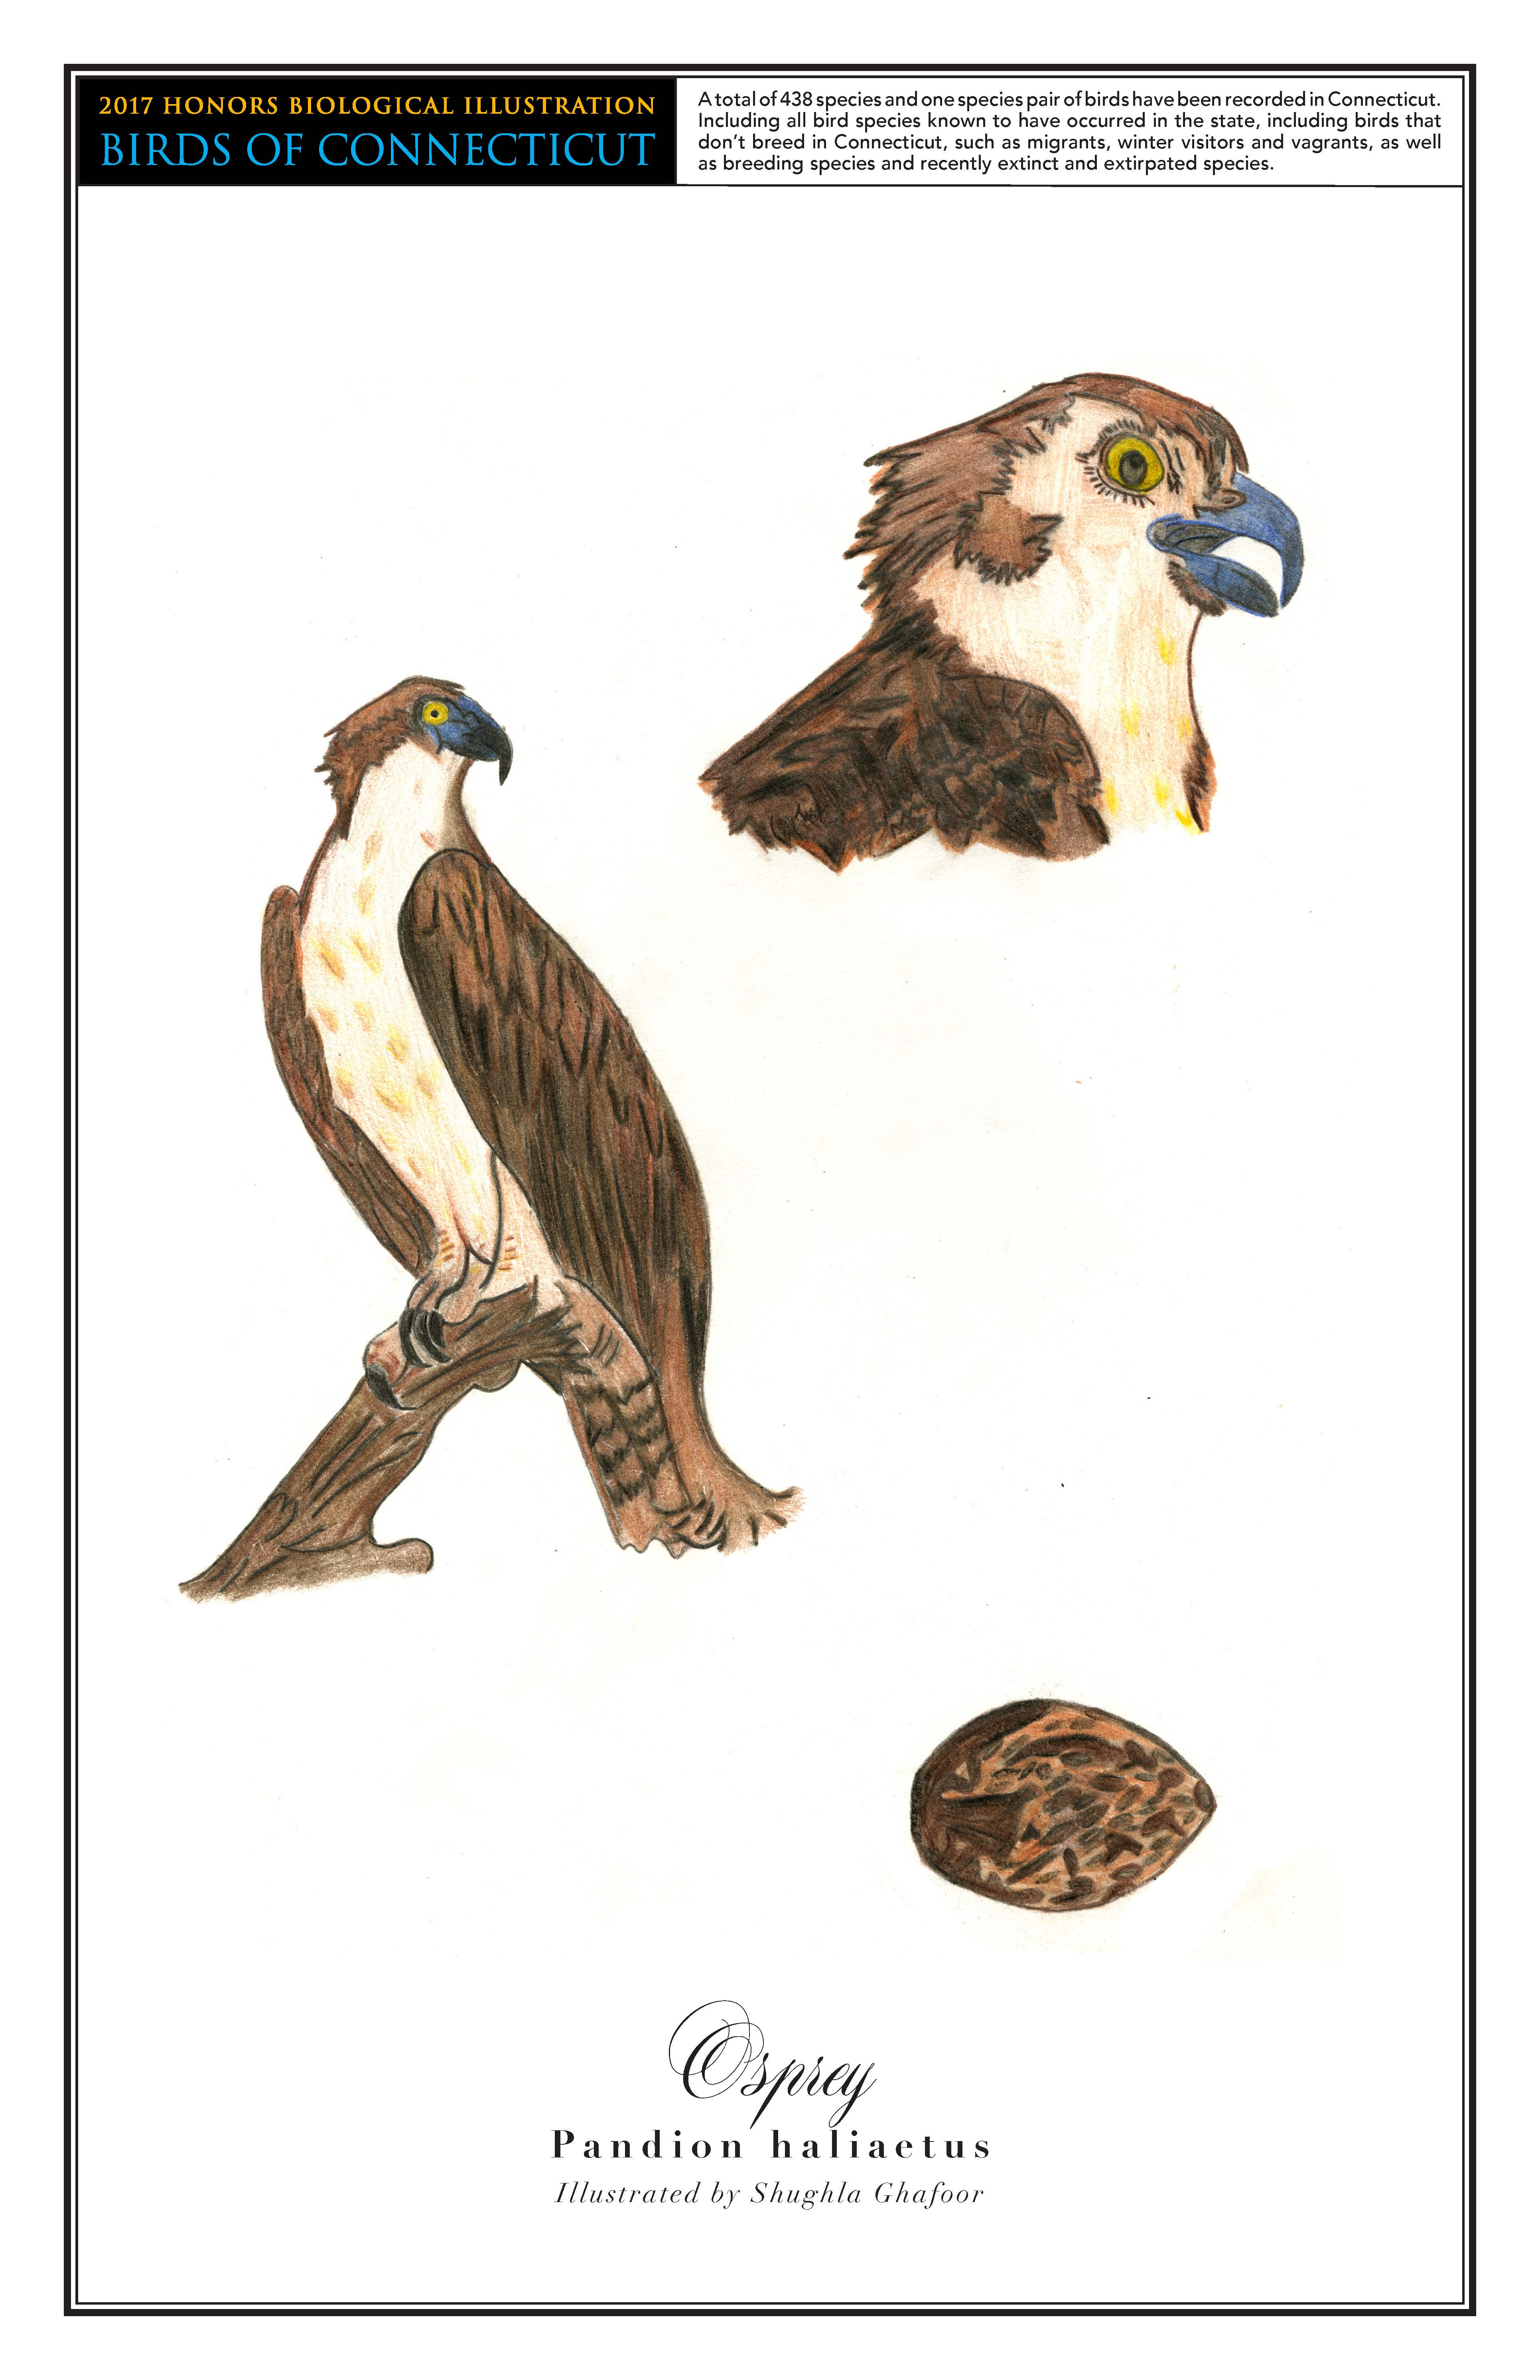 The osprey has a brown head and back and a white underbelly. A drawing of its perched on a branch is on the left. In the top right is a close up drawing of its head, and a drawing of its brown head is on the bottom right.